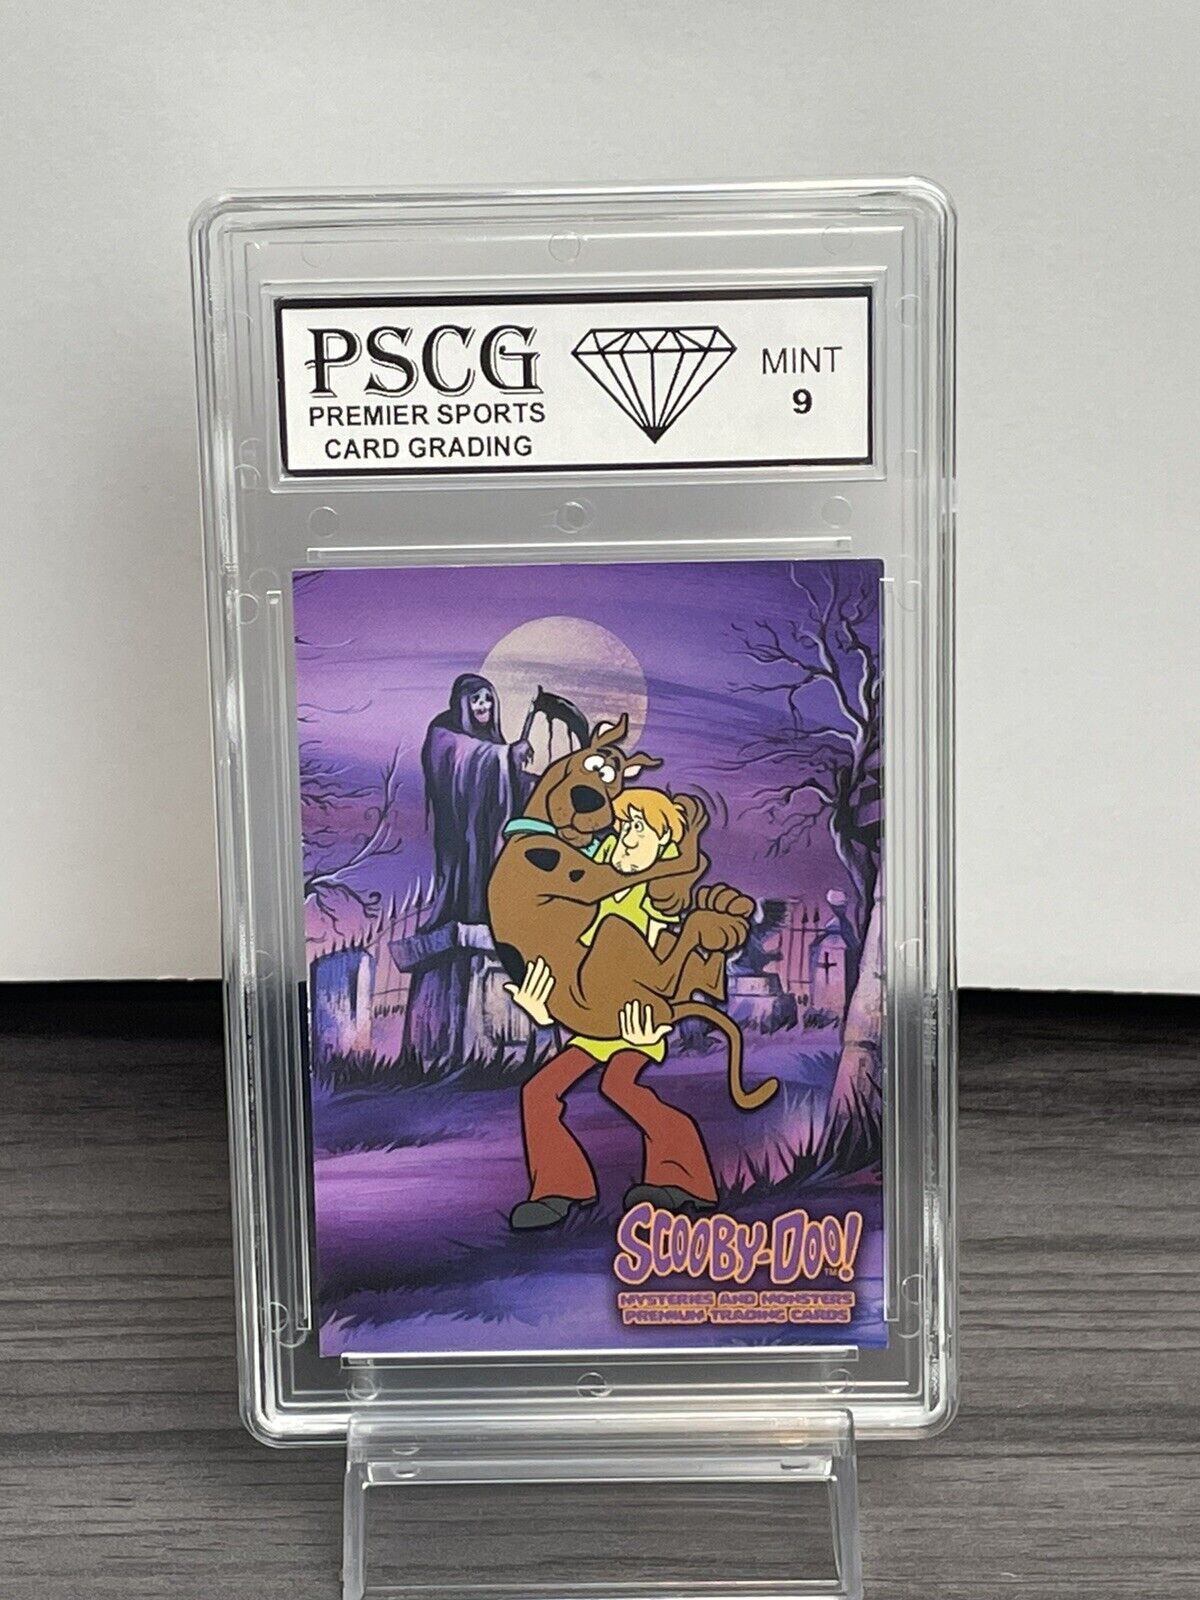 SCOOBY DOO MYSTERIES AND MONSTERS 2003 INKWORKS PROMO CARD SDMM-1 PSCG 9 MINT